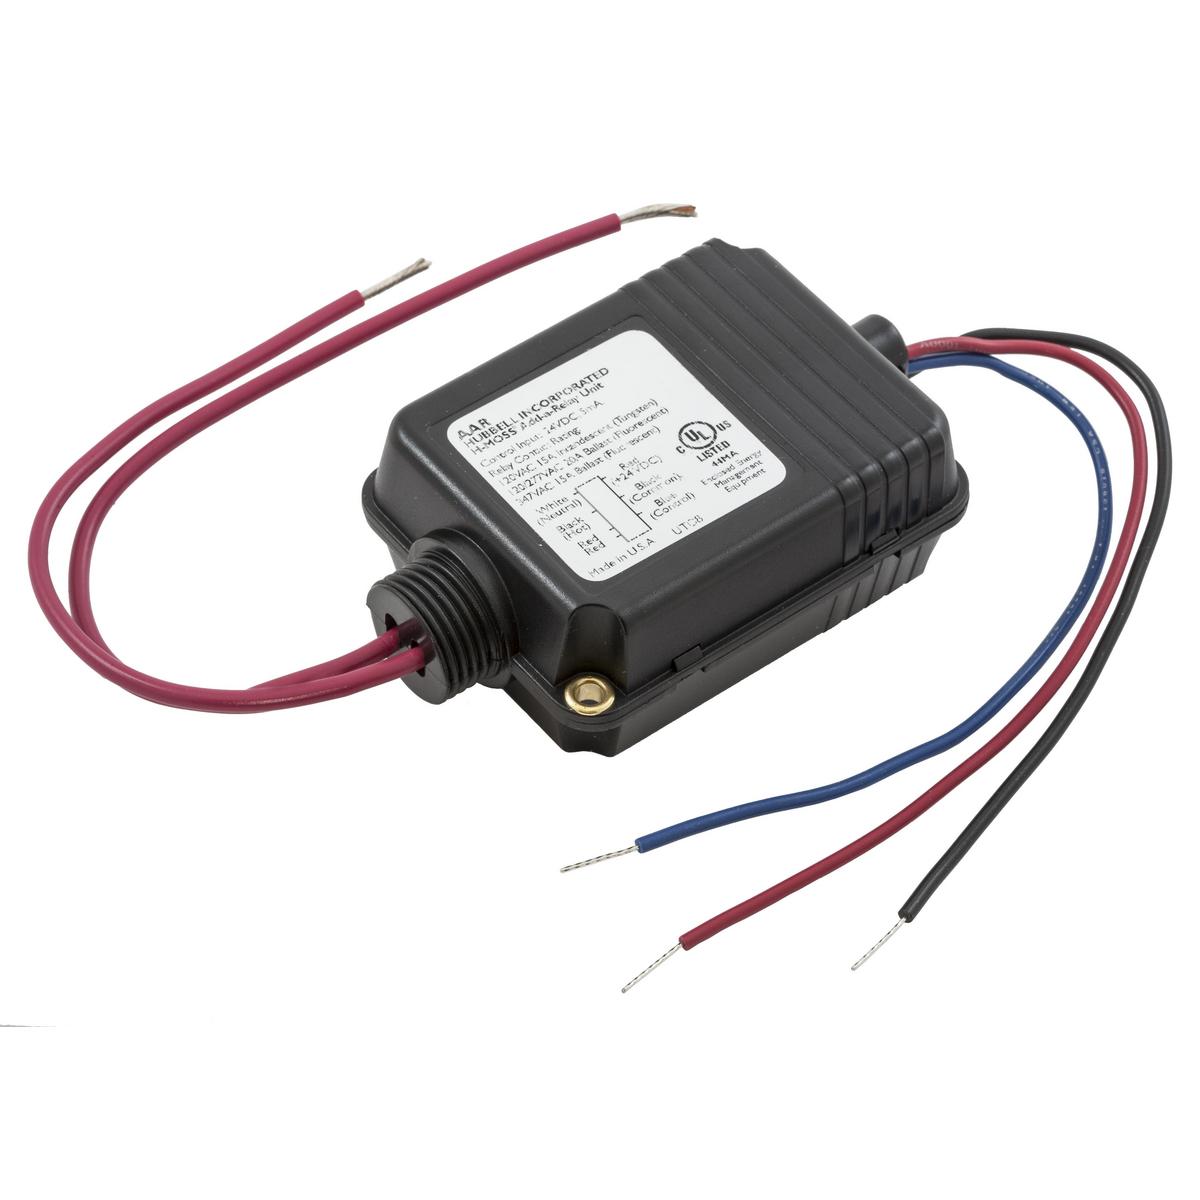 Hubbell AAR Switches and Lighting Controls, H-Moss System, Additional Switching Capacity, Add-A-Relay, 120/277V AC  ; The AAR contains an internal relay for control of an external lighting load ; Zero Arc Point Switching Minimizes relay contact ; Easily mounts inside